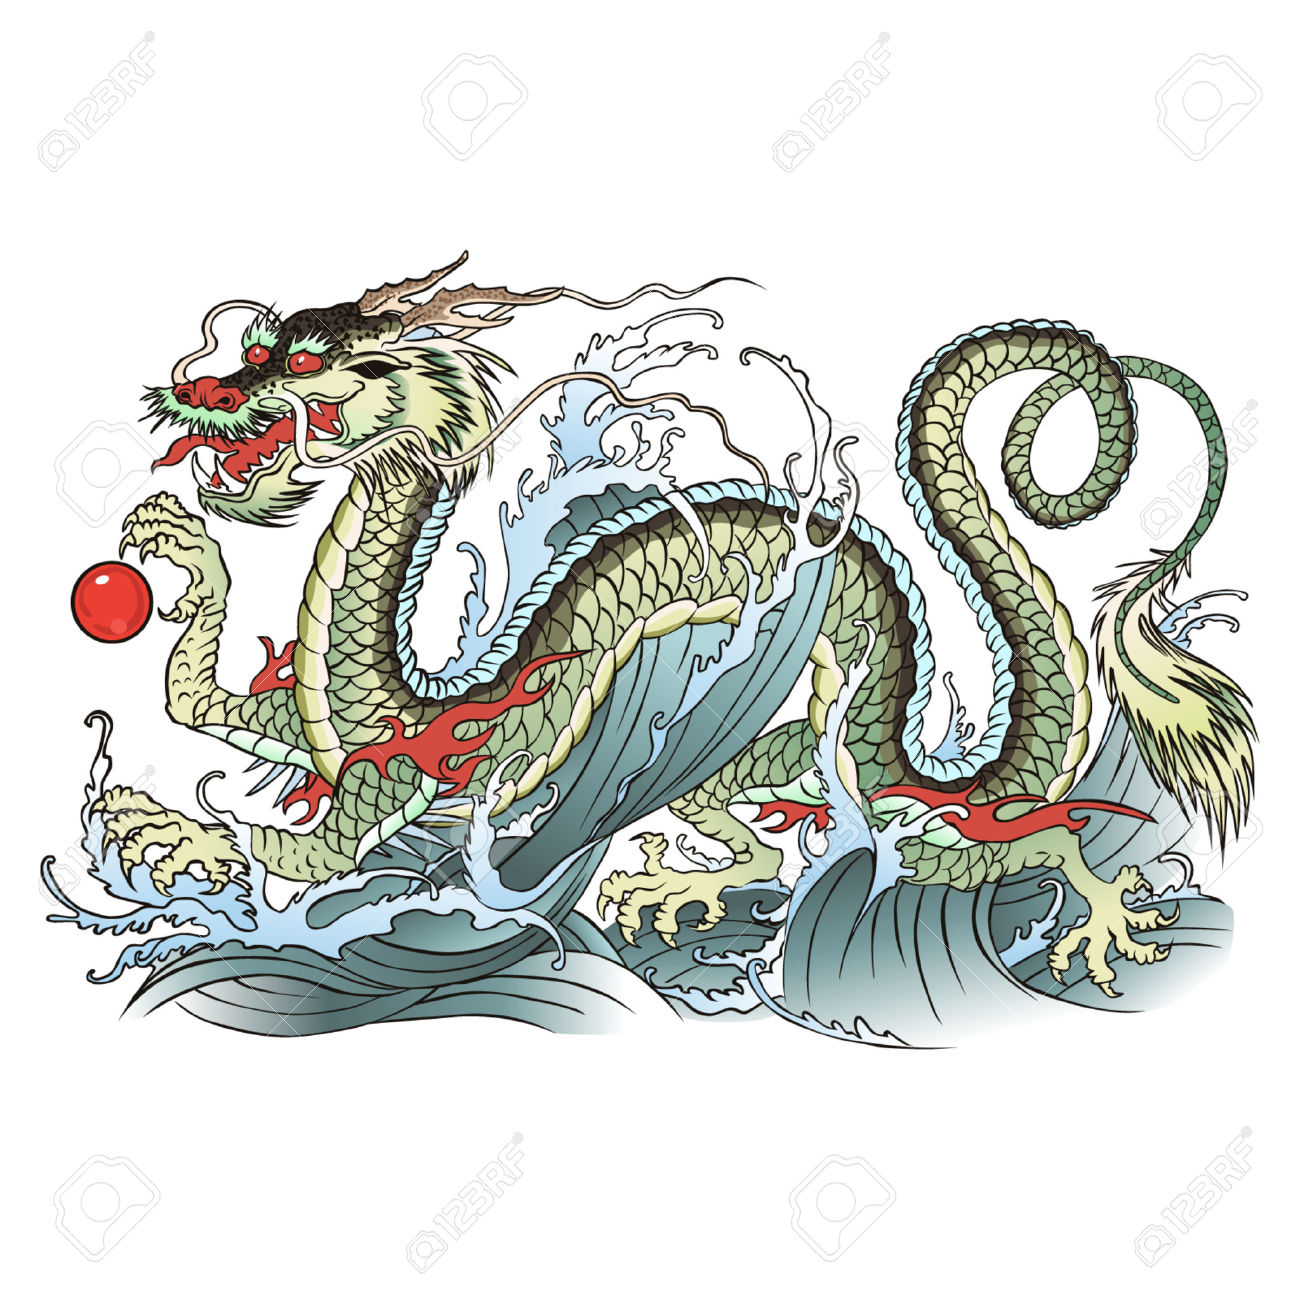 Eastern Water Dragon clipart #17, Download drawings